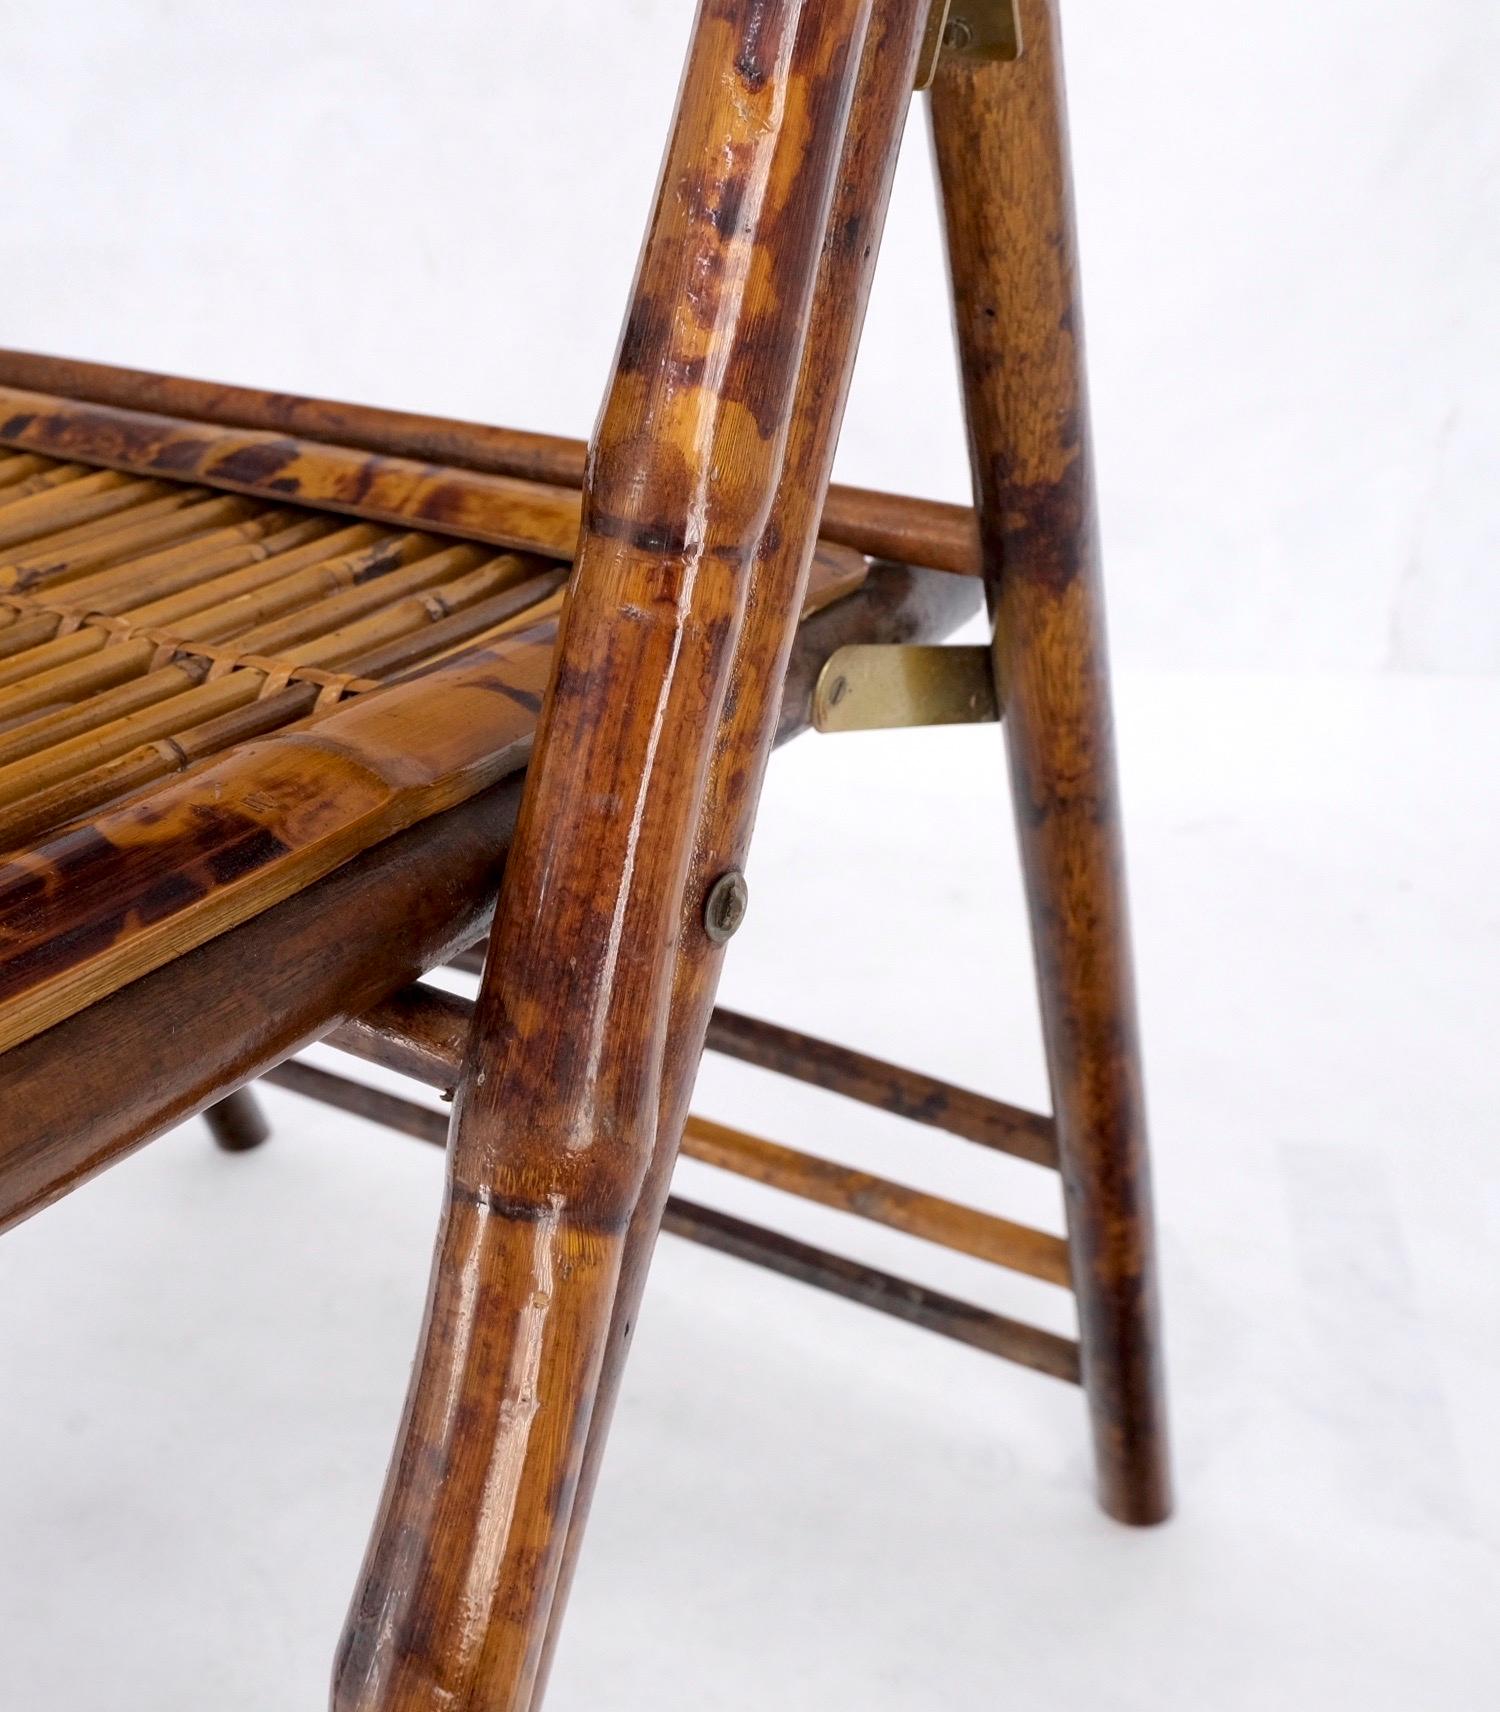 vintage bamboo table and chairs